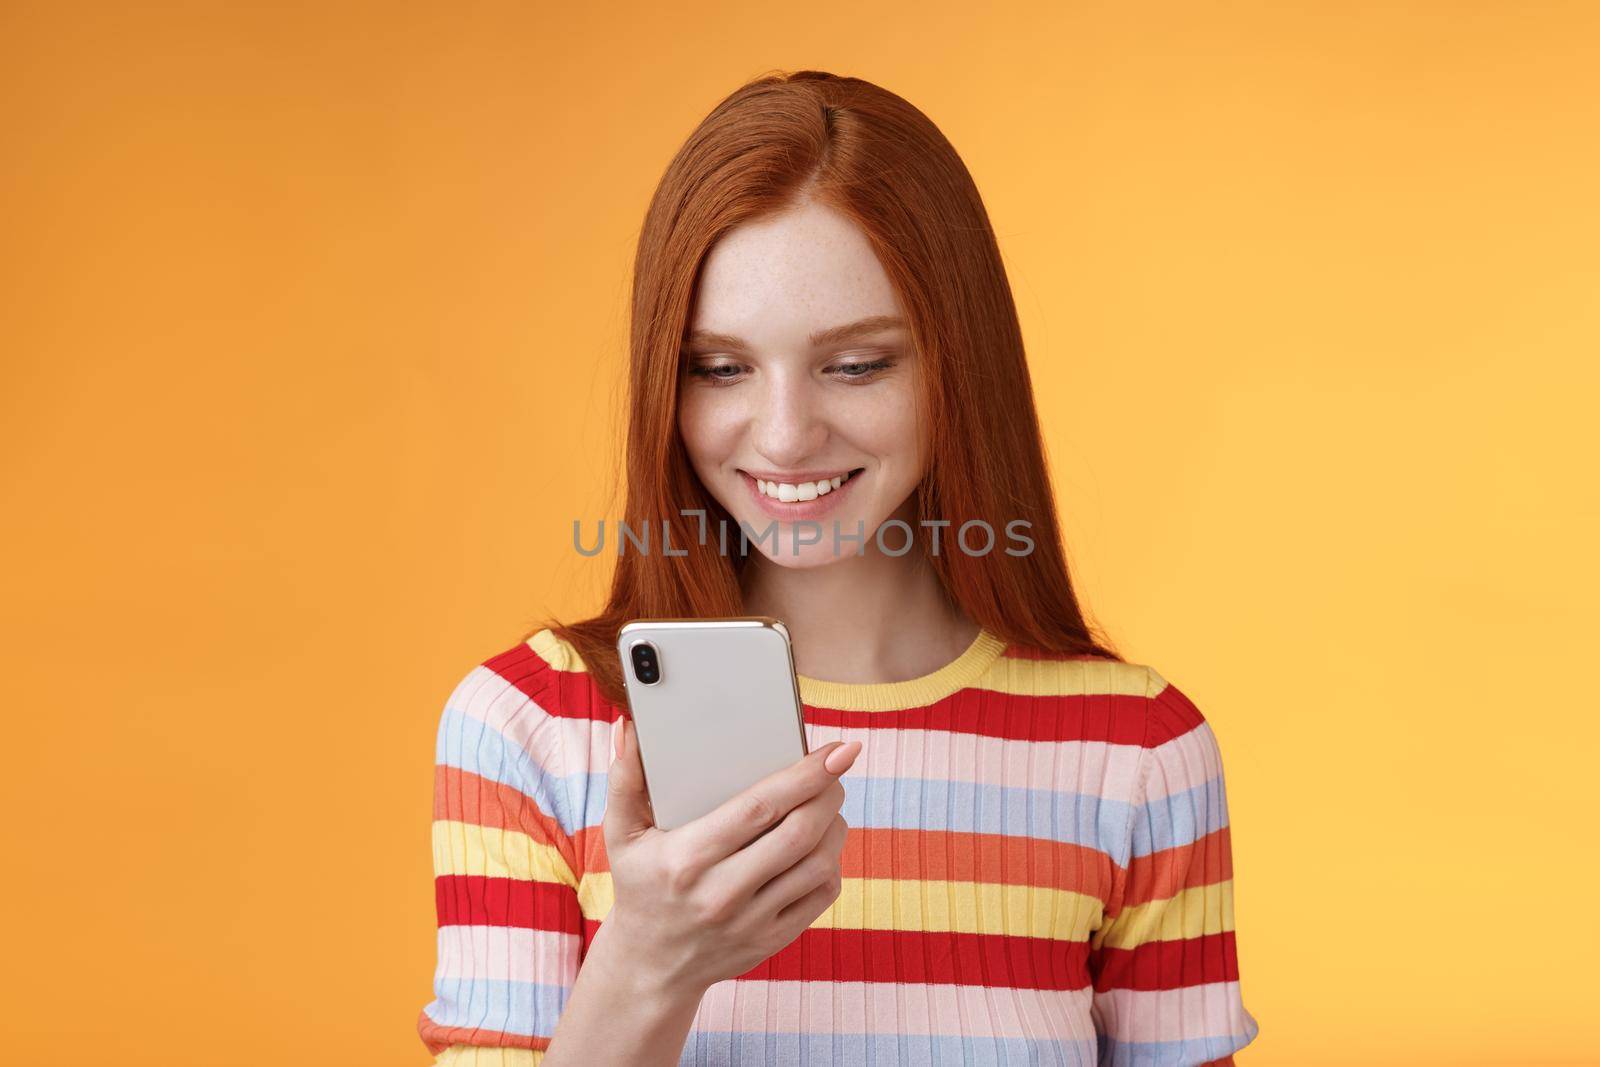 Charming modern redhead girl college student checking message box holding smartphone look happy smiling delighted cellphone display receive hundred likes photo post online, orange background.